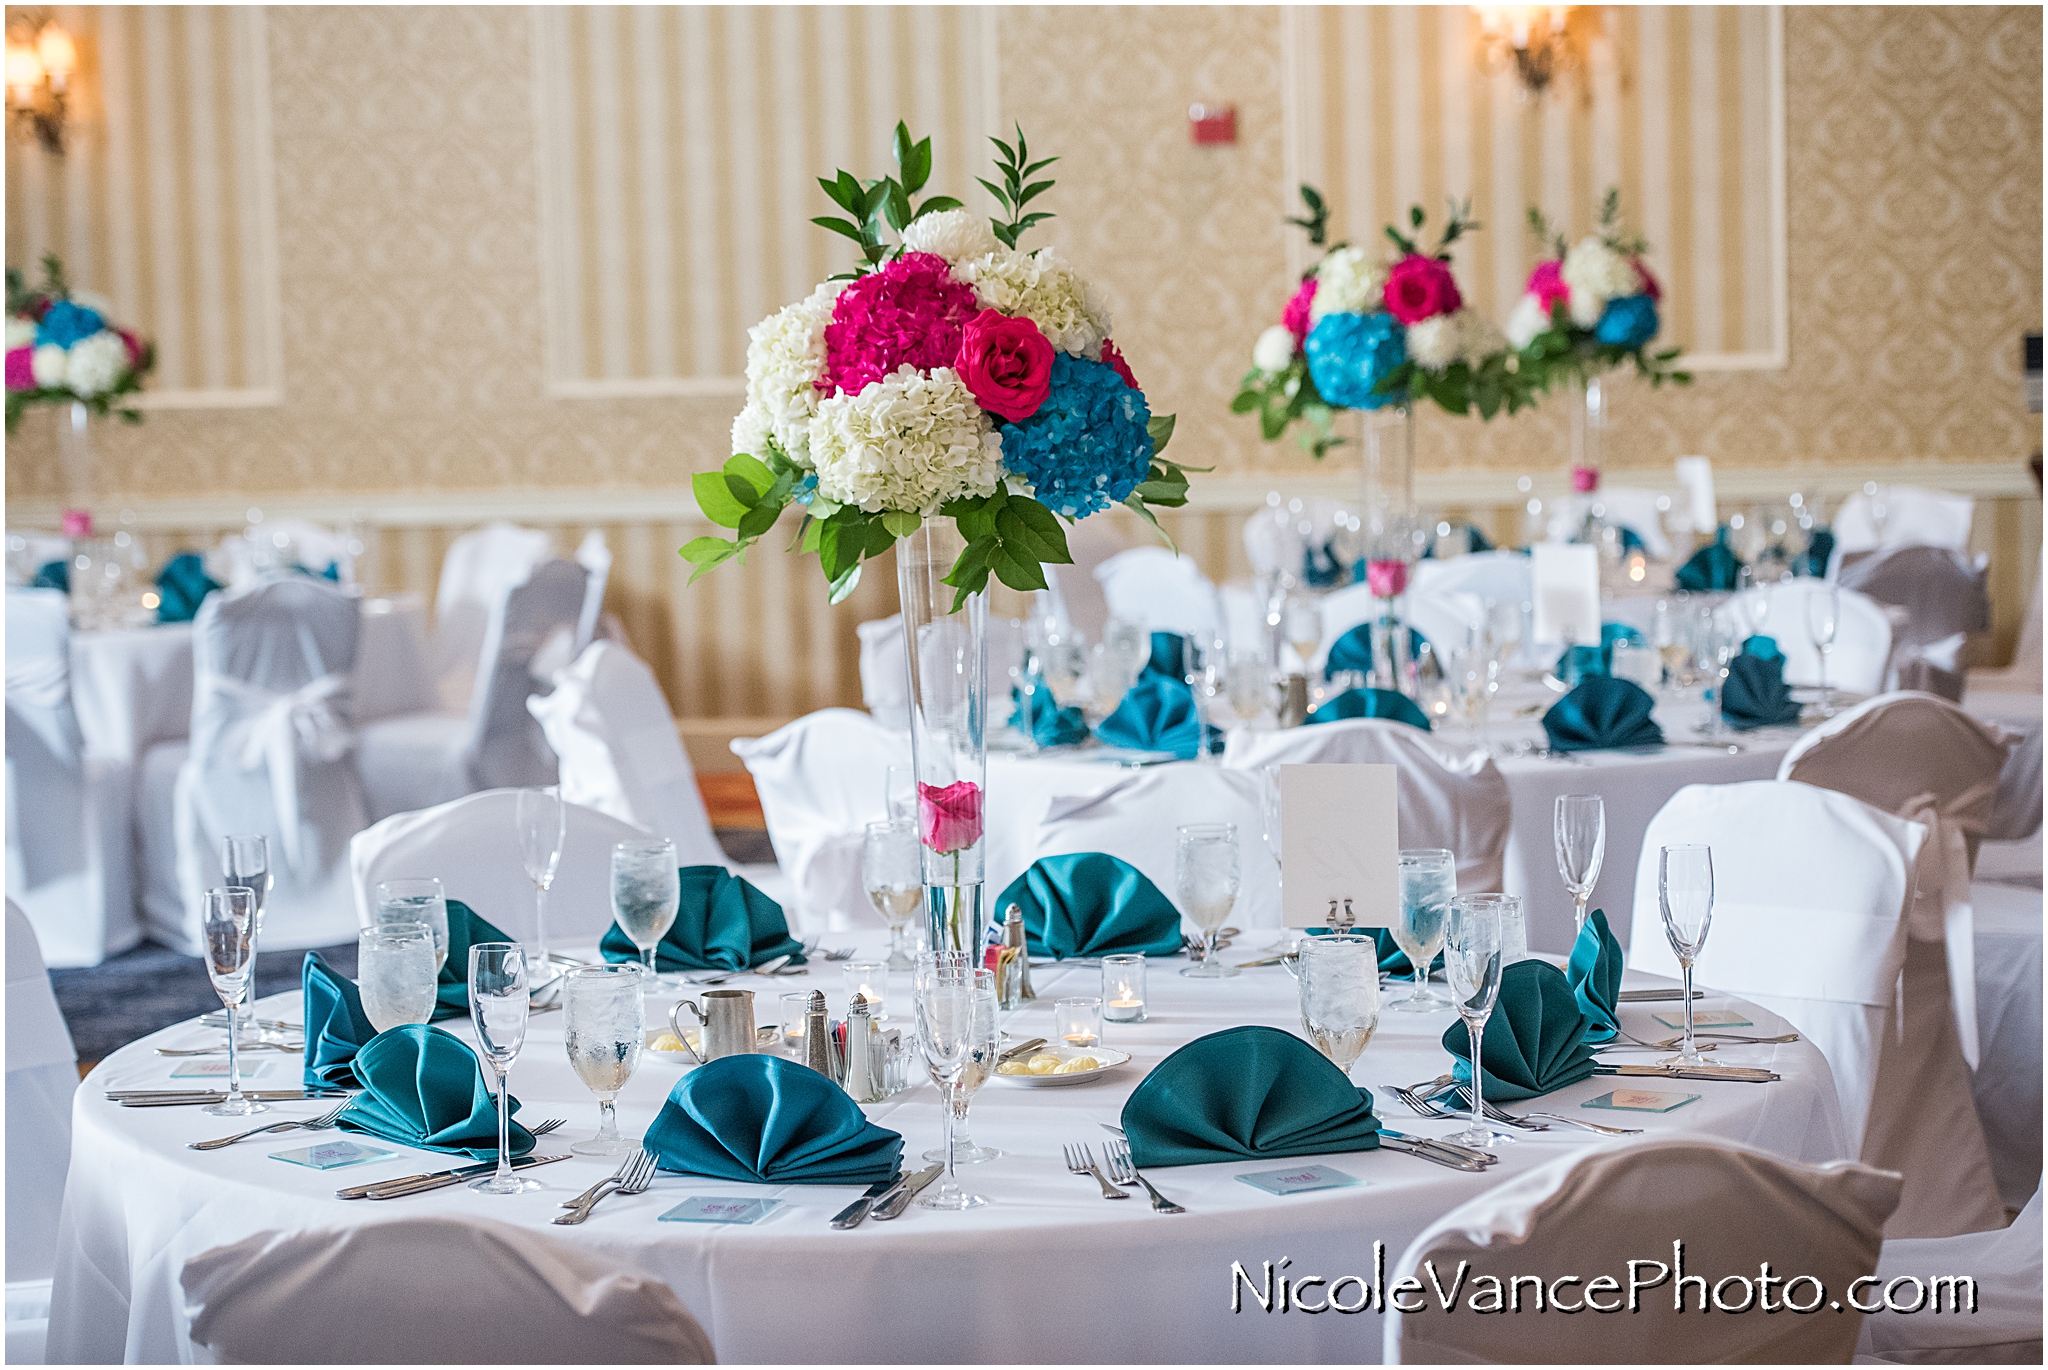 Floral arrangements provided by Flowers by Zoie adorn the tables at the reception at Virginia Crossings.